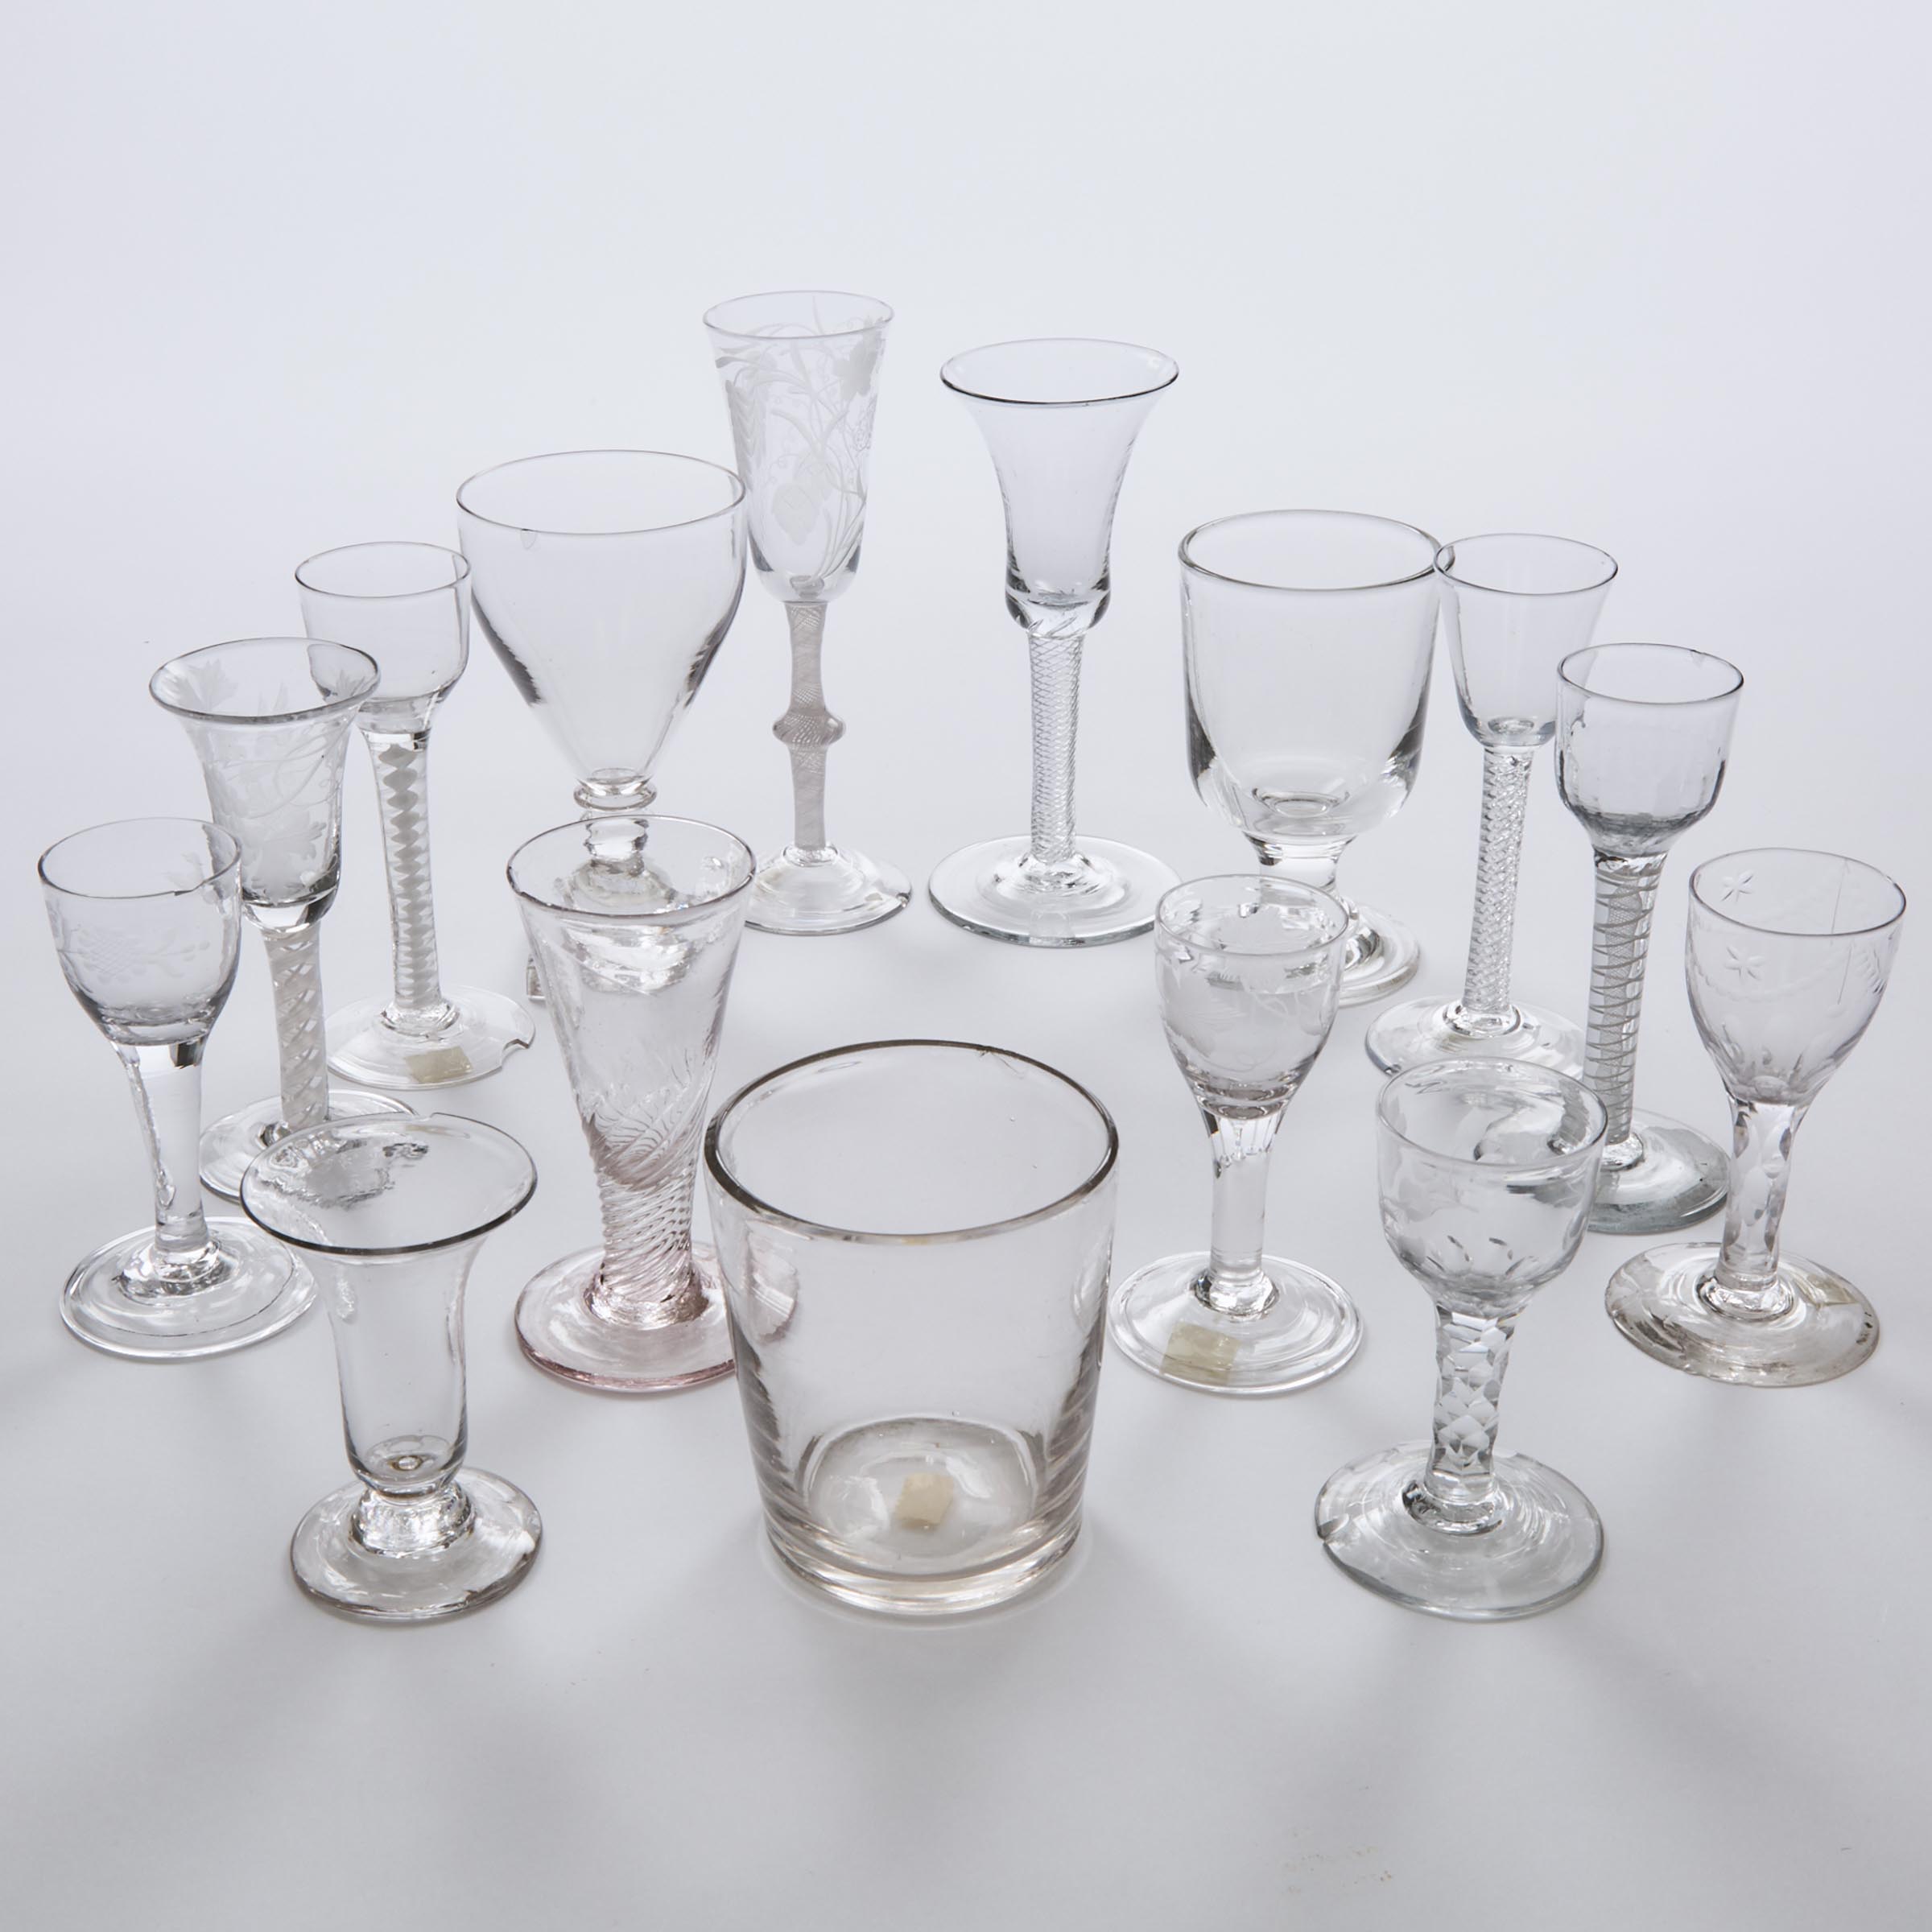 Group of Fifteen Various English Drinking Glasses, 18th/19th century